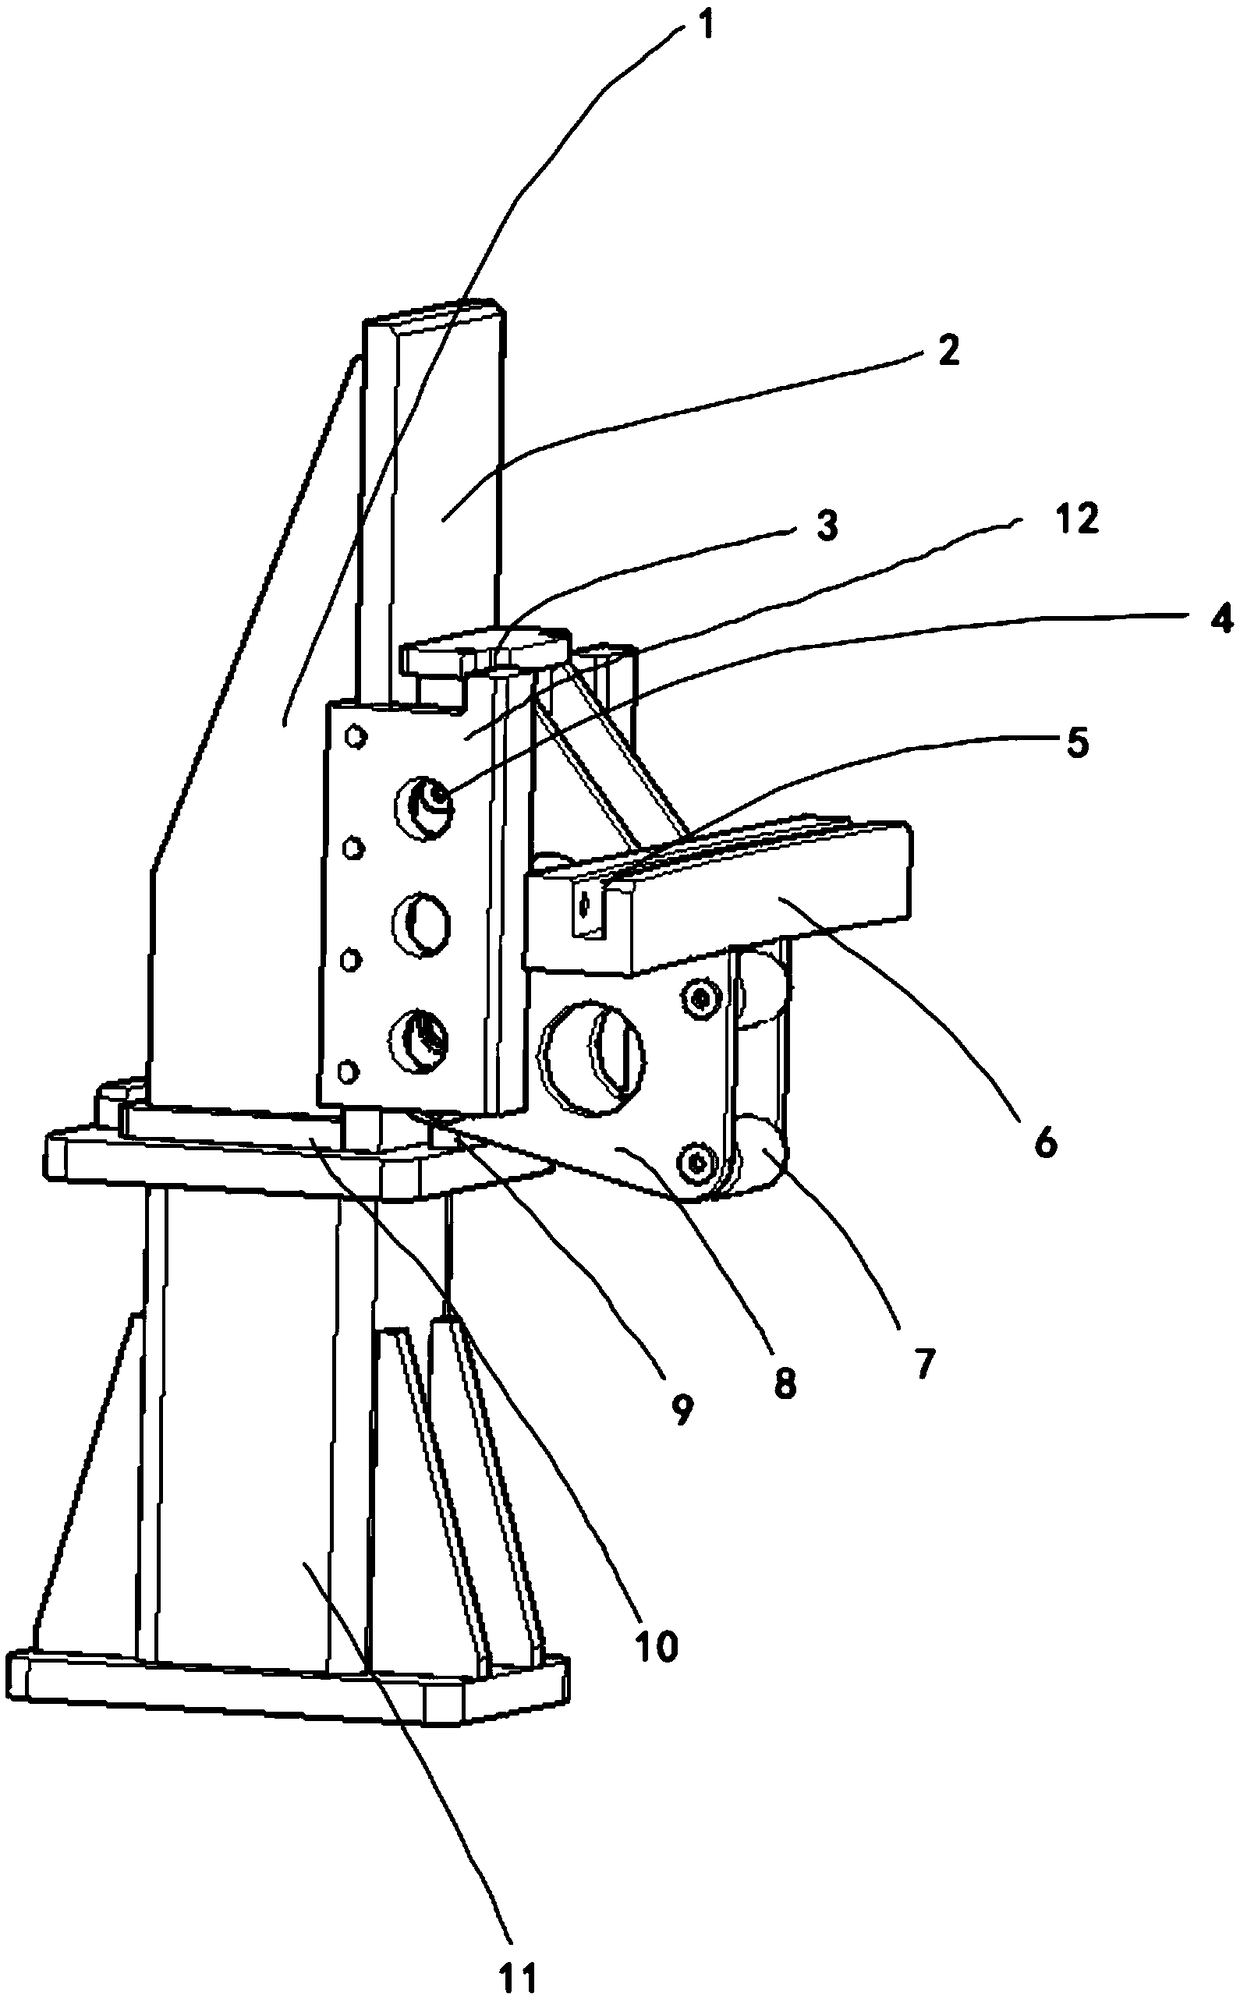 Wind-driven generator stator and rotor sleeving tool